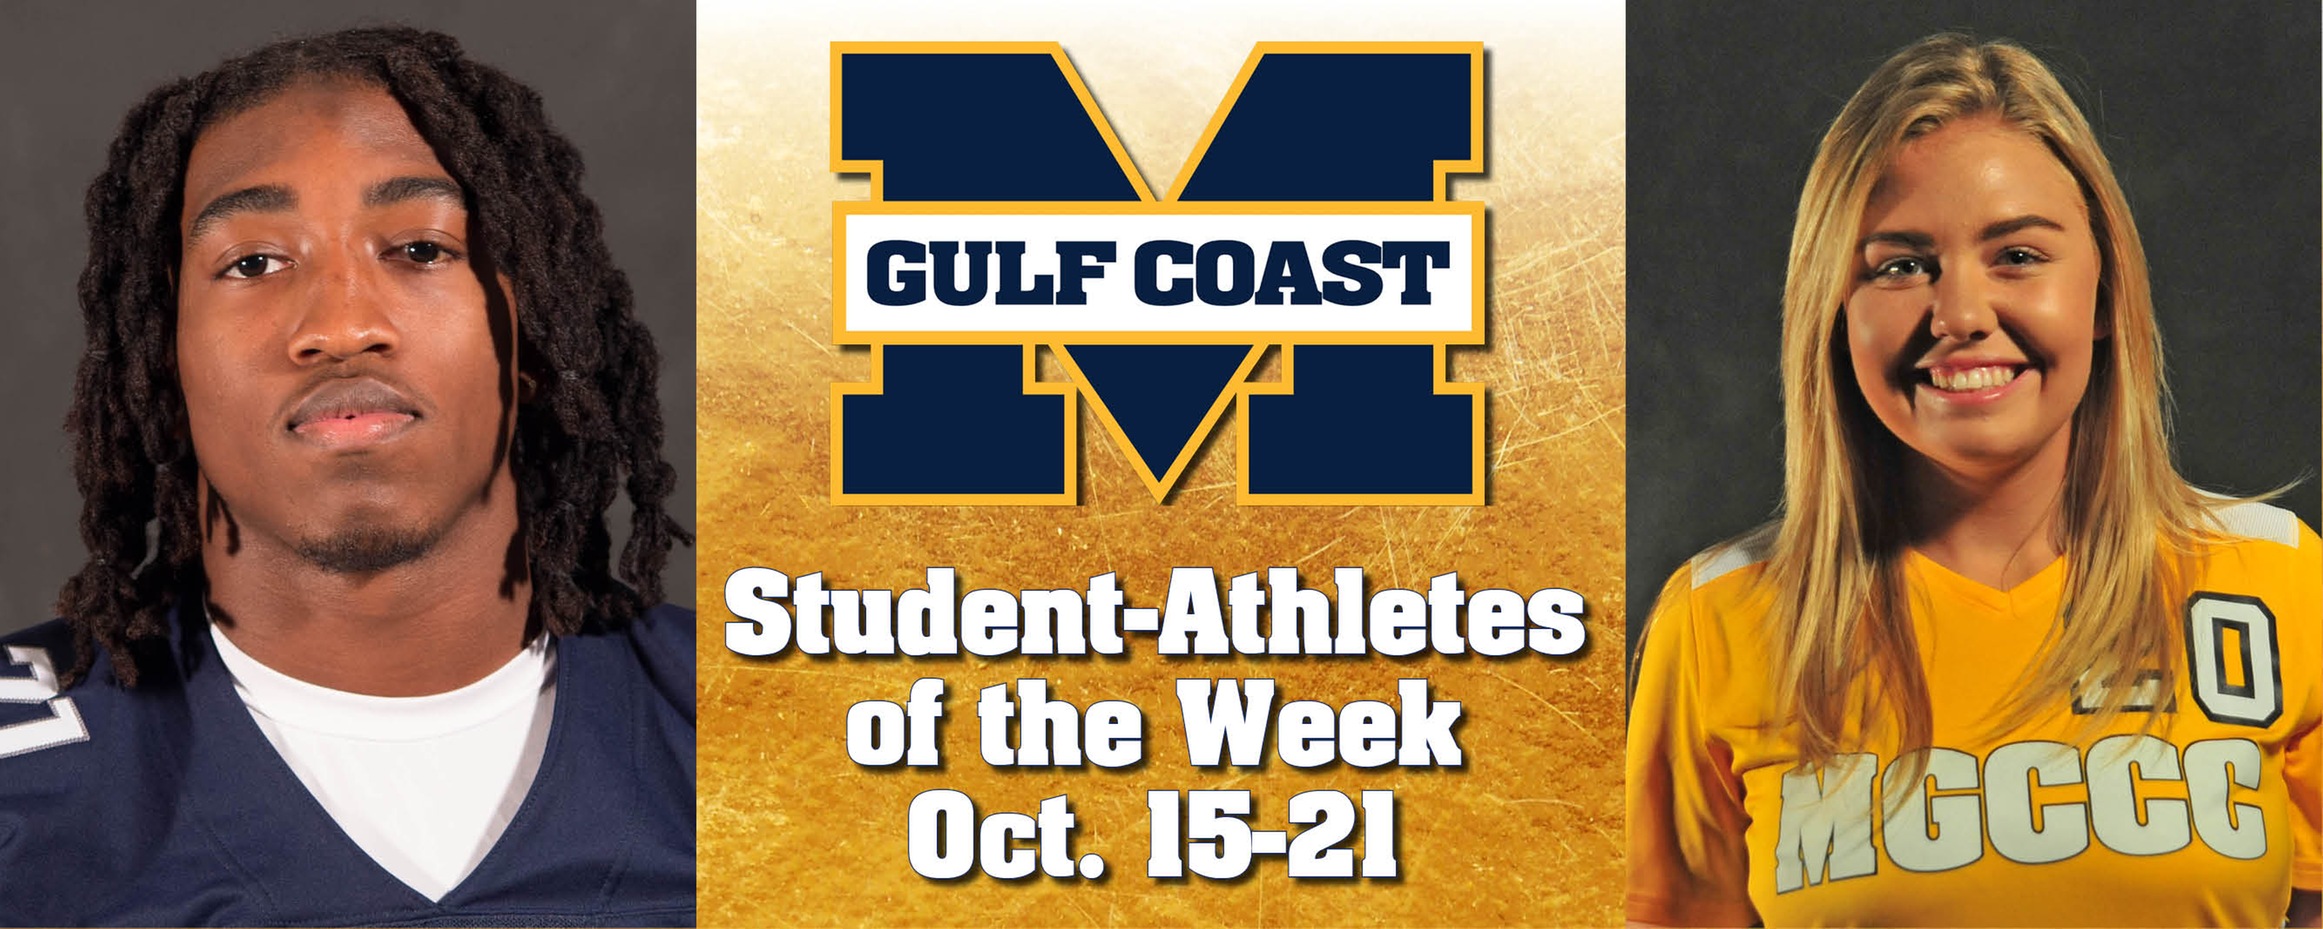 Johnson, Helms named MGCCC Student-Athletes of the Week